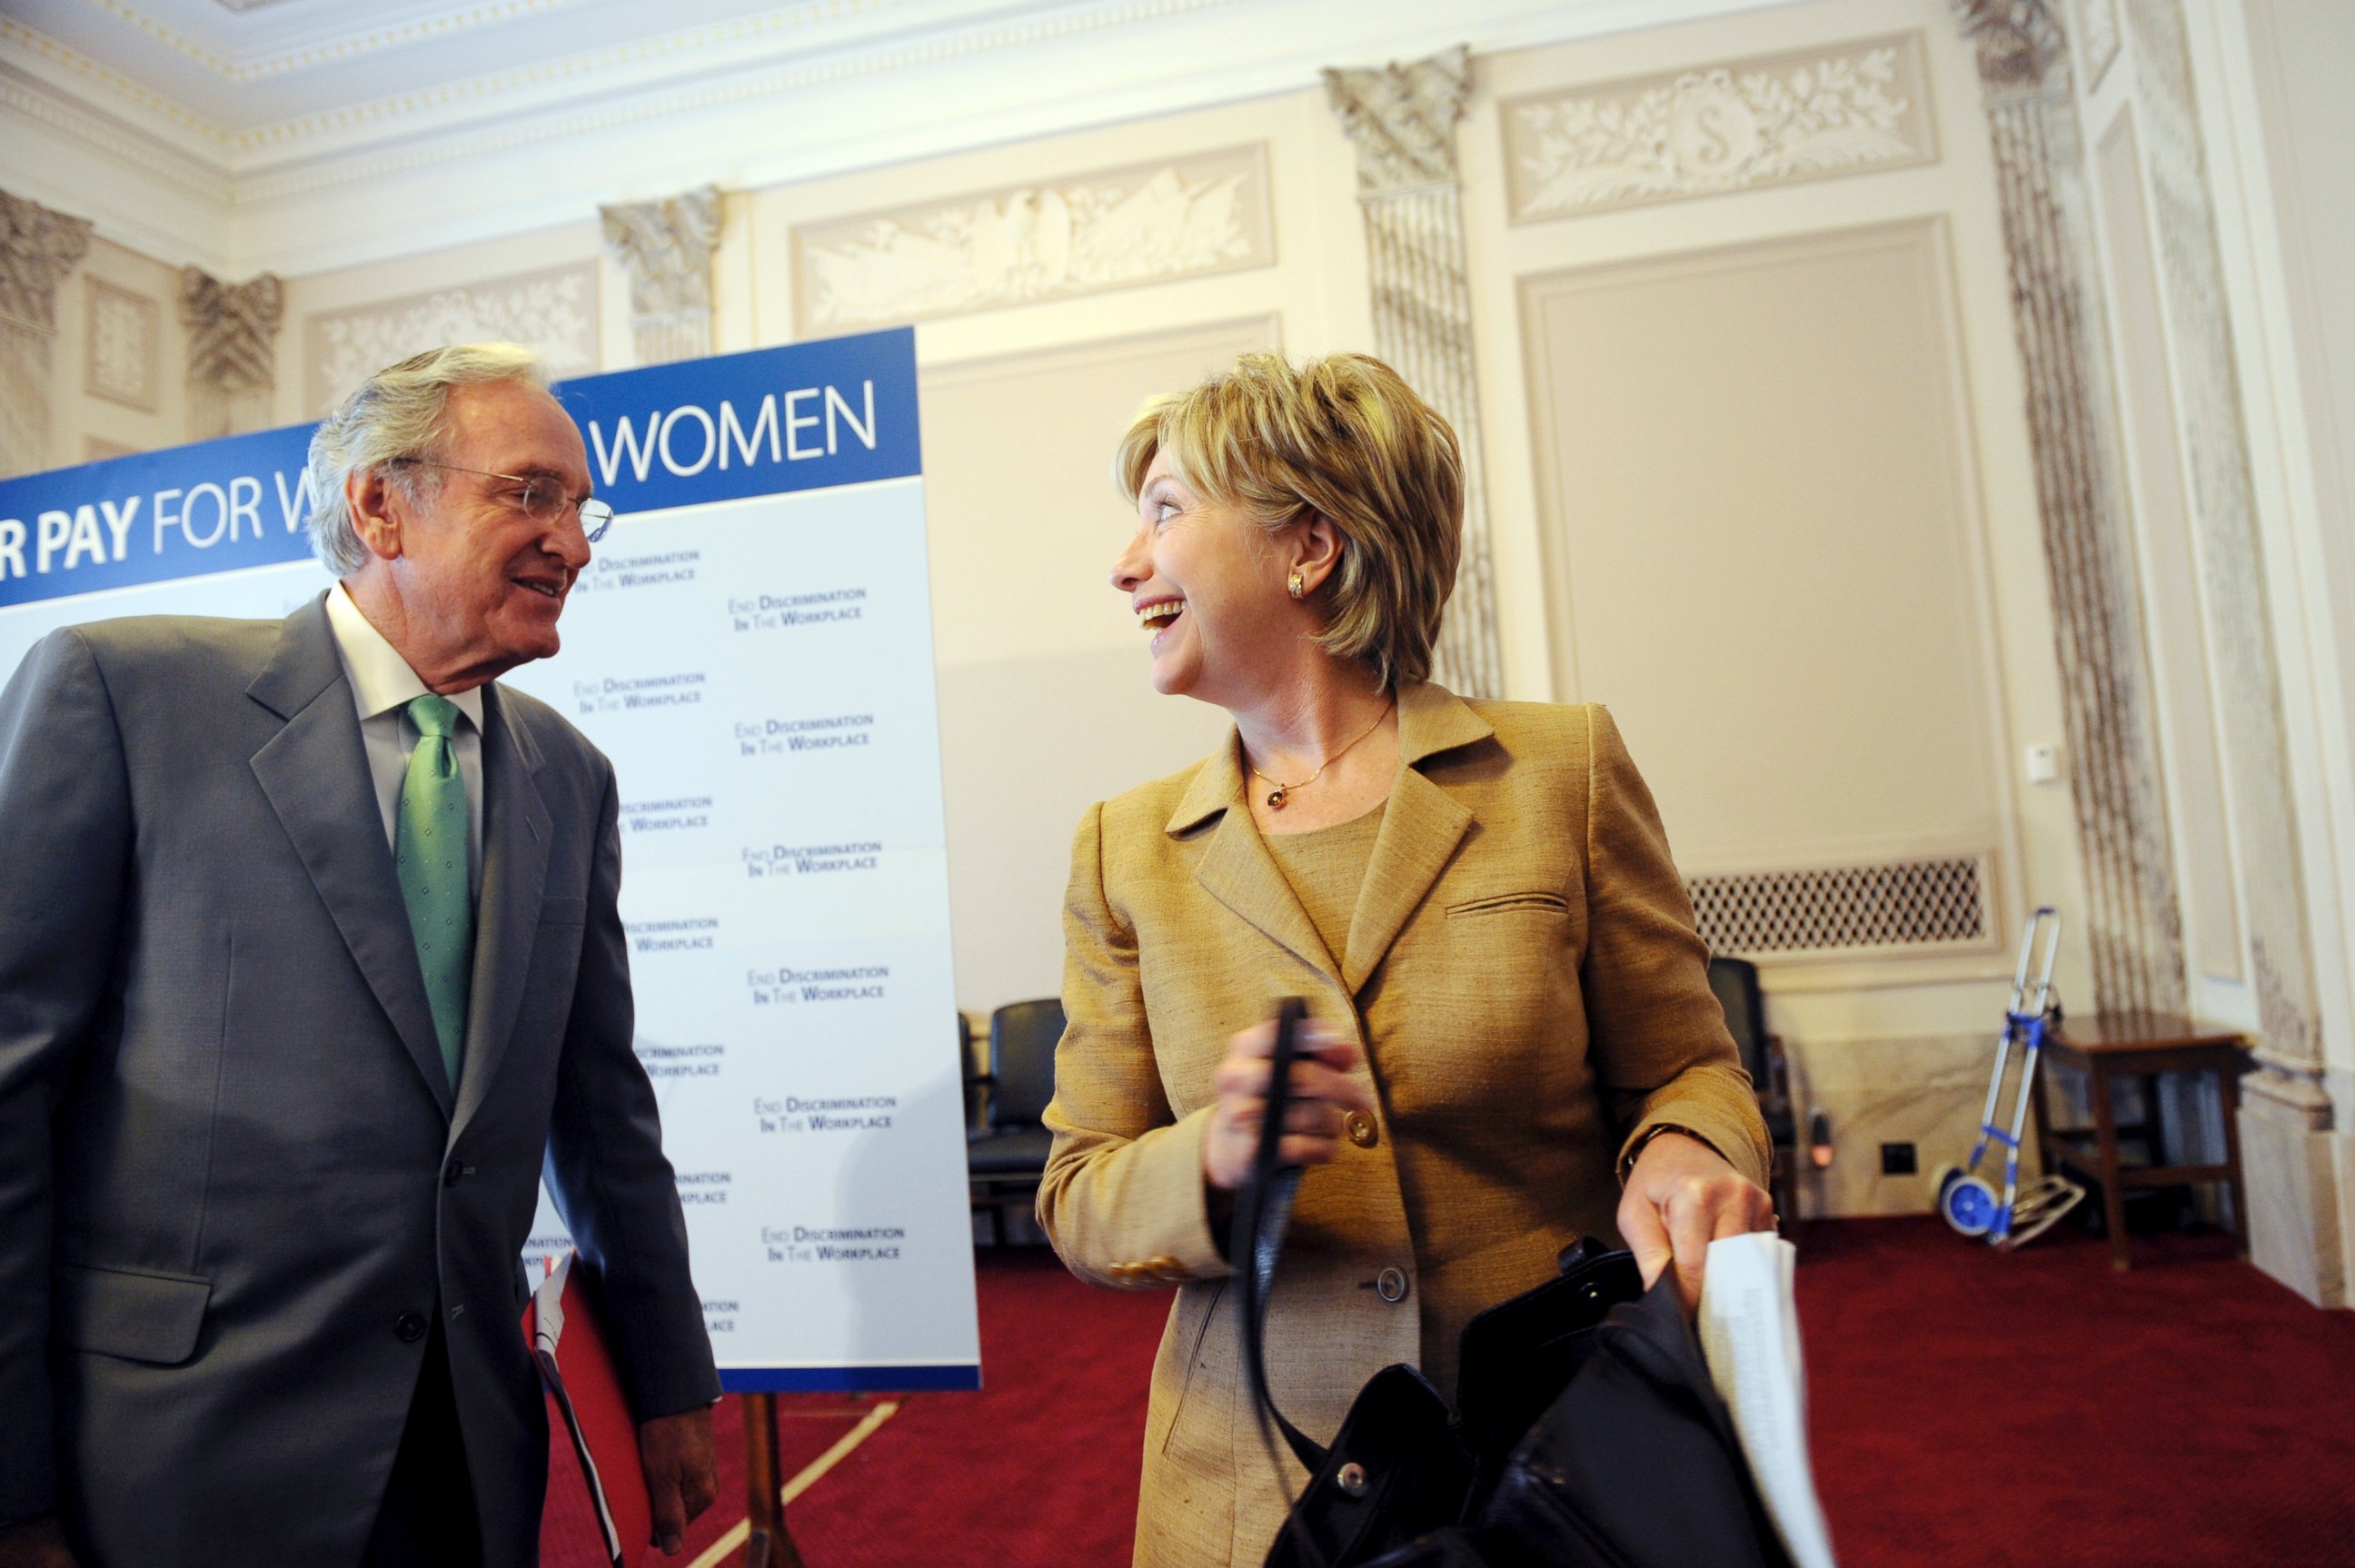 PHOTO: Sen. Tom Harkin, D-Iowa, and Hillary Clinton, leave a news conference in this Sept. 10, 2008 file photo.